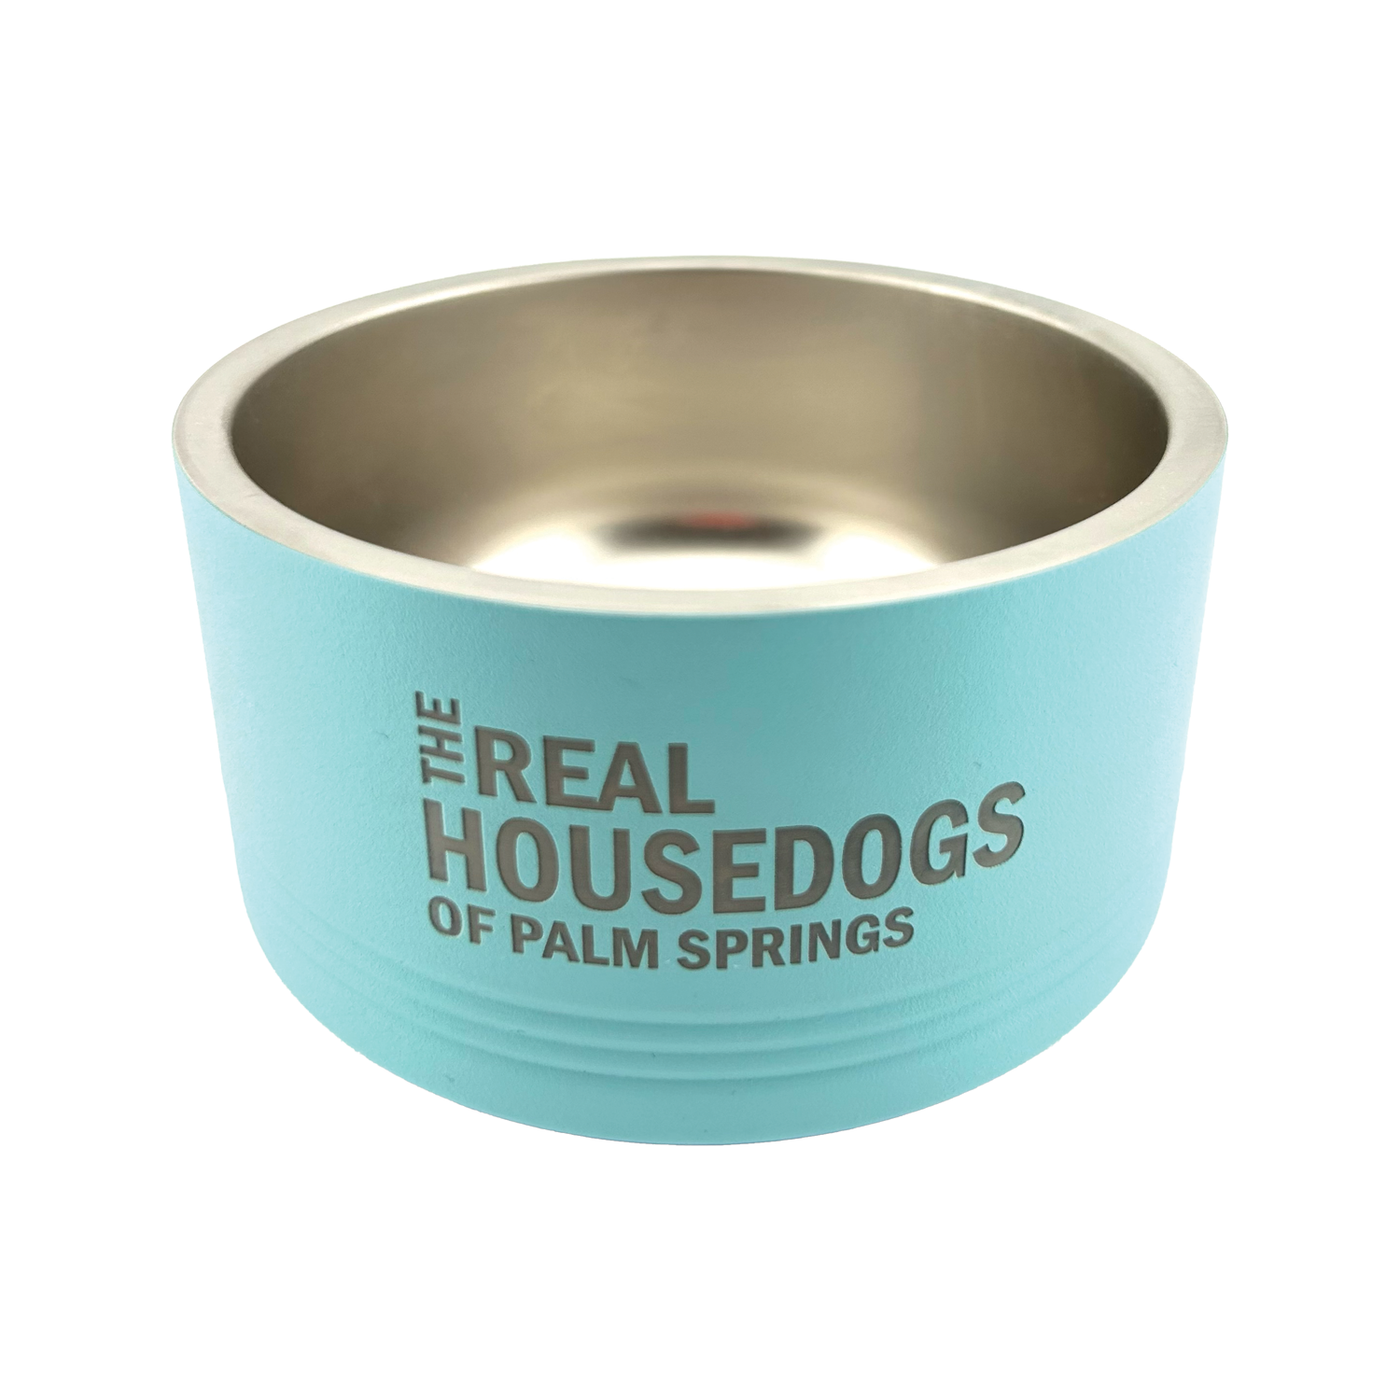 Real Housedogs of Palm Springs 18 Oz Dog Bowl - Teal